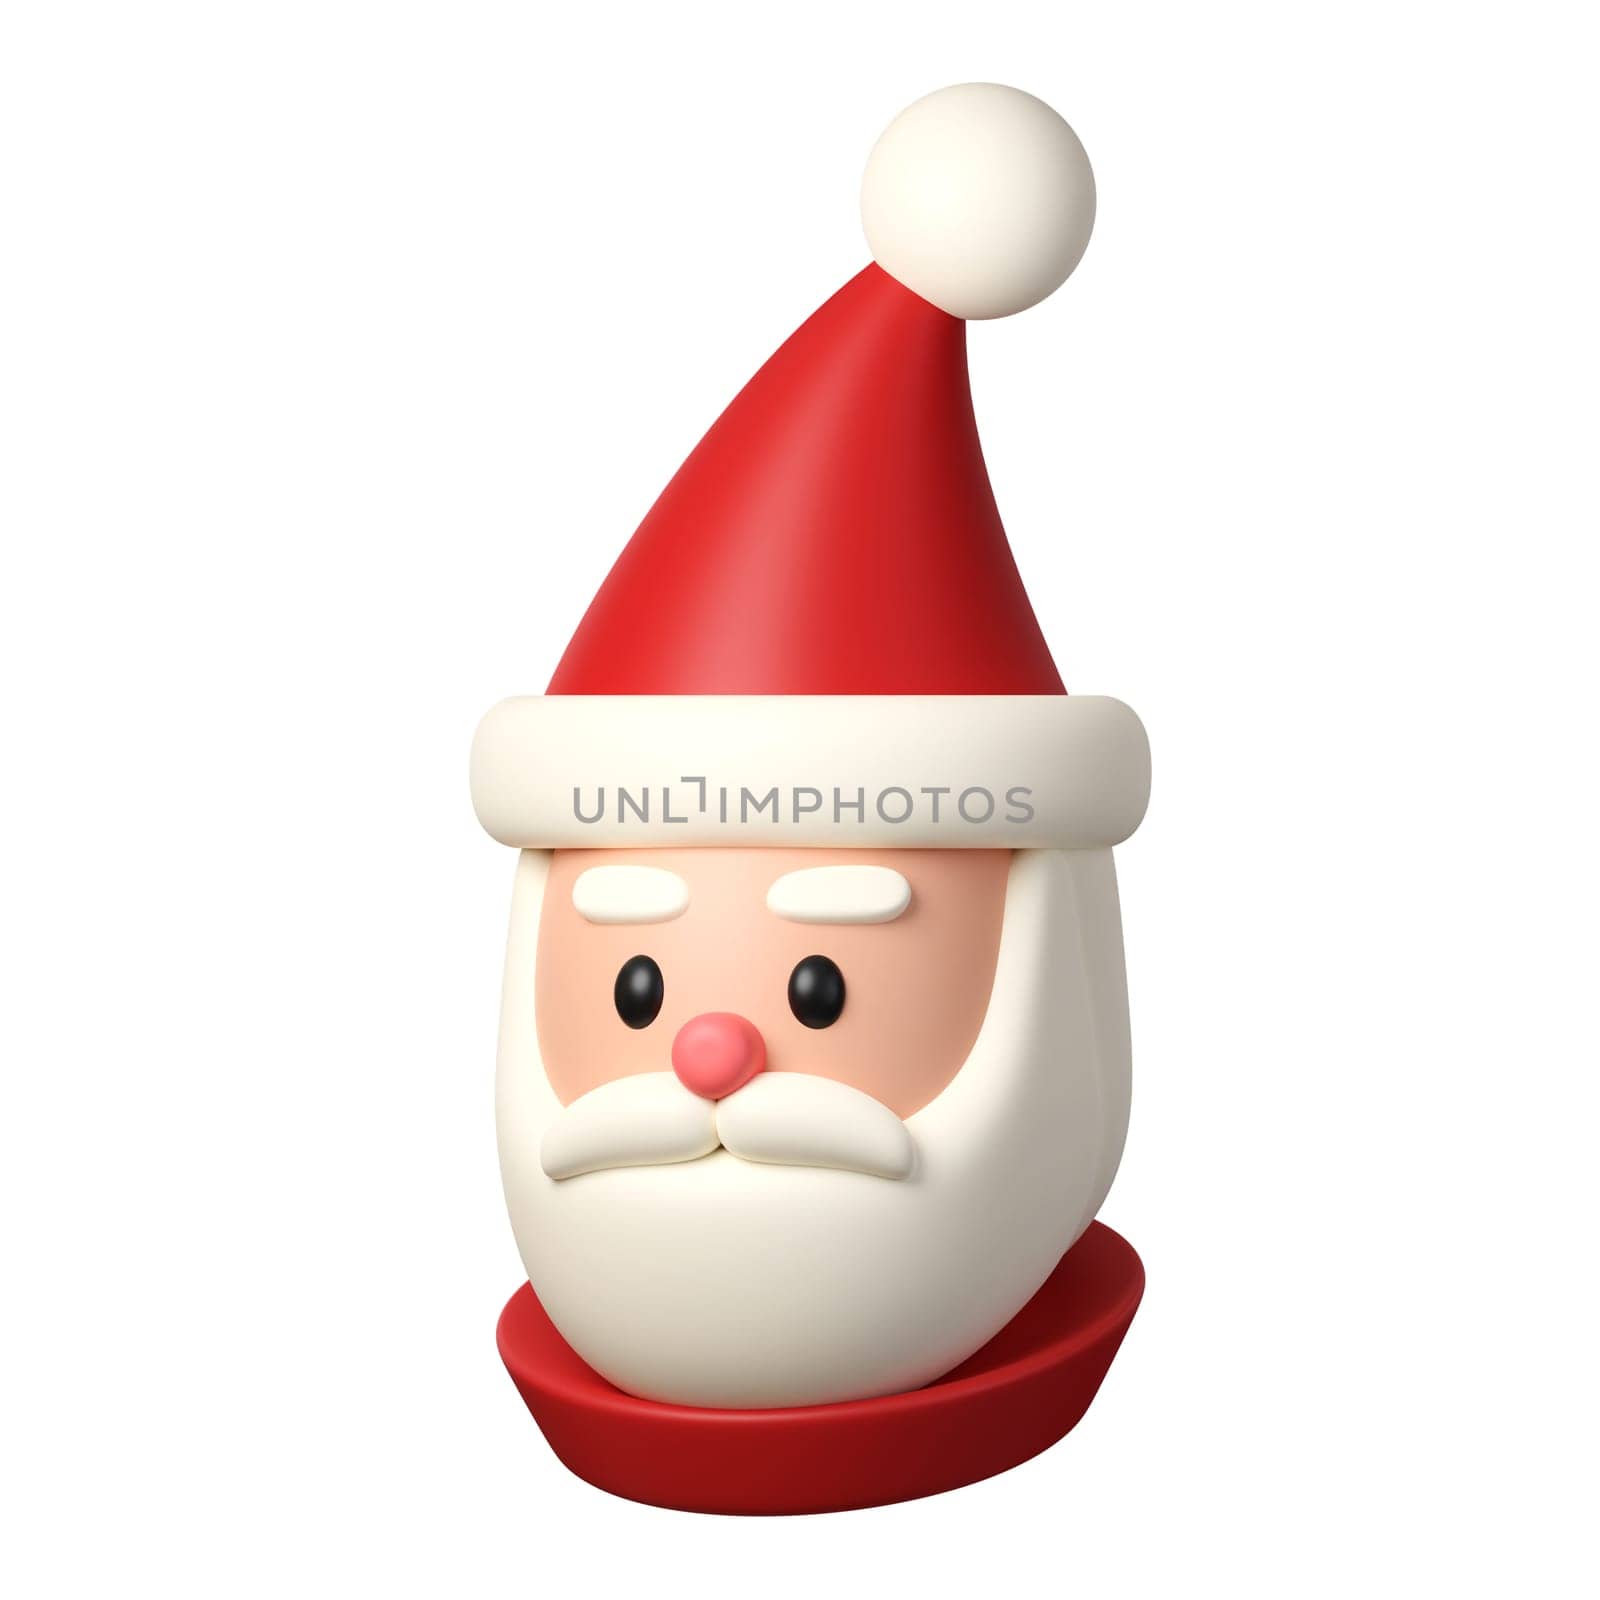 3d Christmas santa claus icon. minimal decorative festive conical shape tree. New Year's holiday decor. 3d design element In cartoon style. Icon isolated on white background. 3d illustration by meepiangraphic